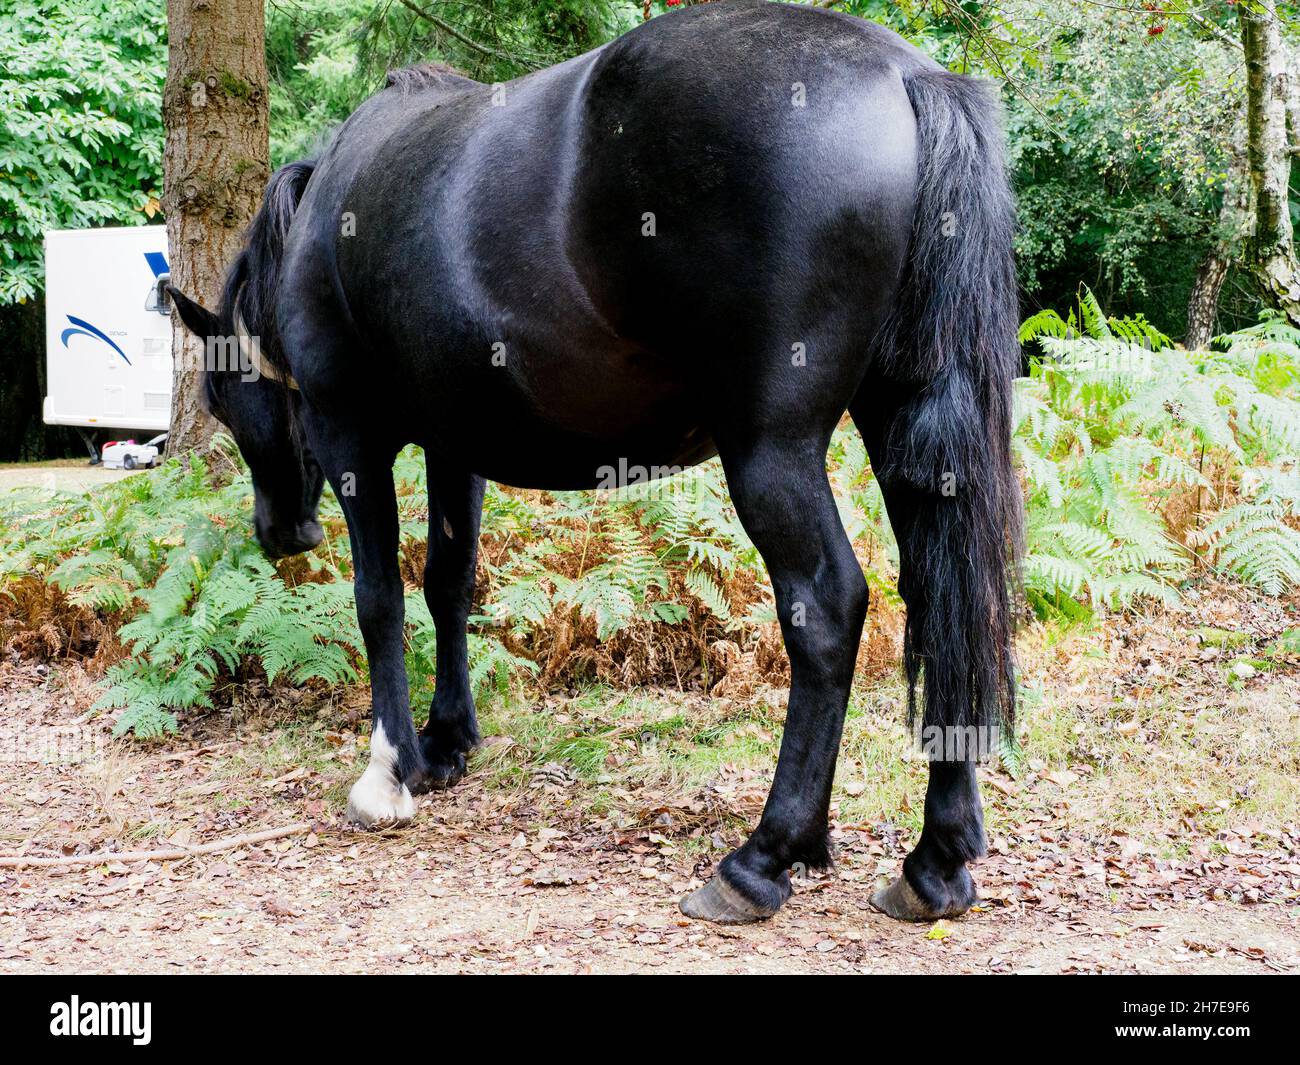 New forest pony with tail cut to show owner has paid marking fee, The New Forest, Hampshire, UK Stock Photo